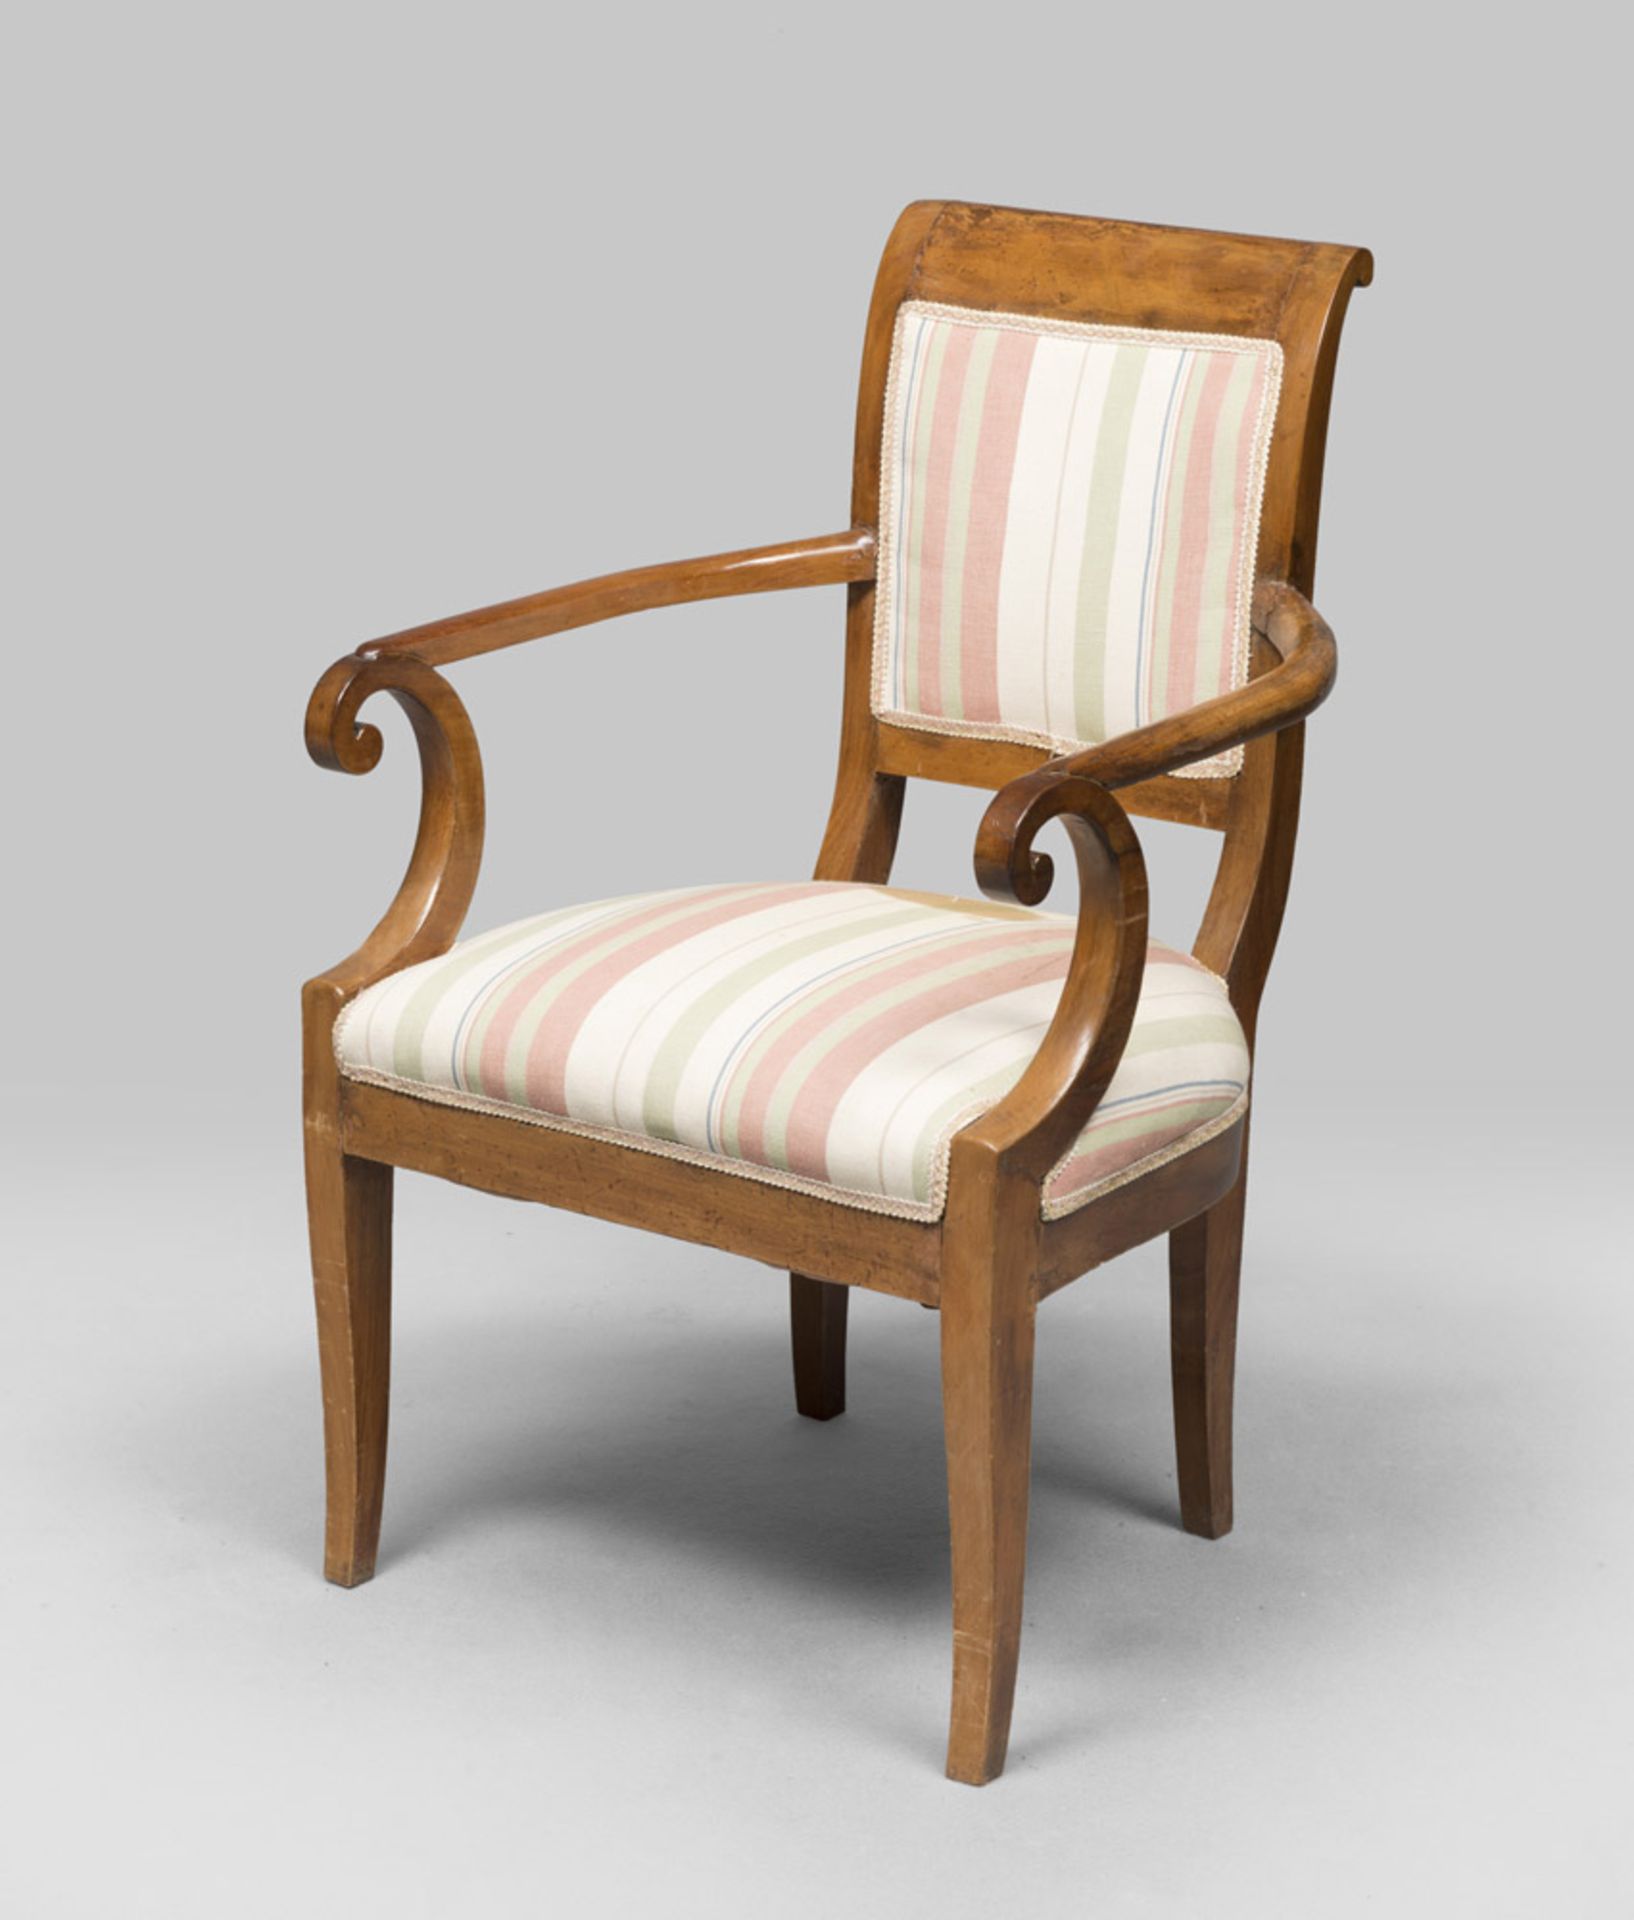 Elm armchair, period of the Biedemaier. Measures cm. 84 x 56 x 59.POLTRONCINA IN OLMO, PERIODO DEL